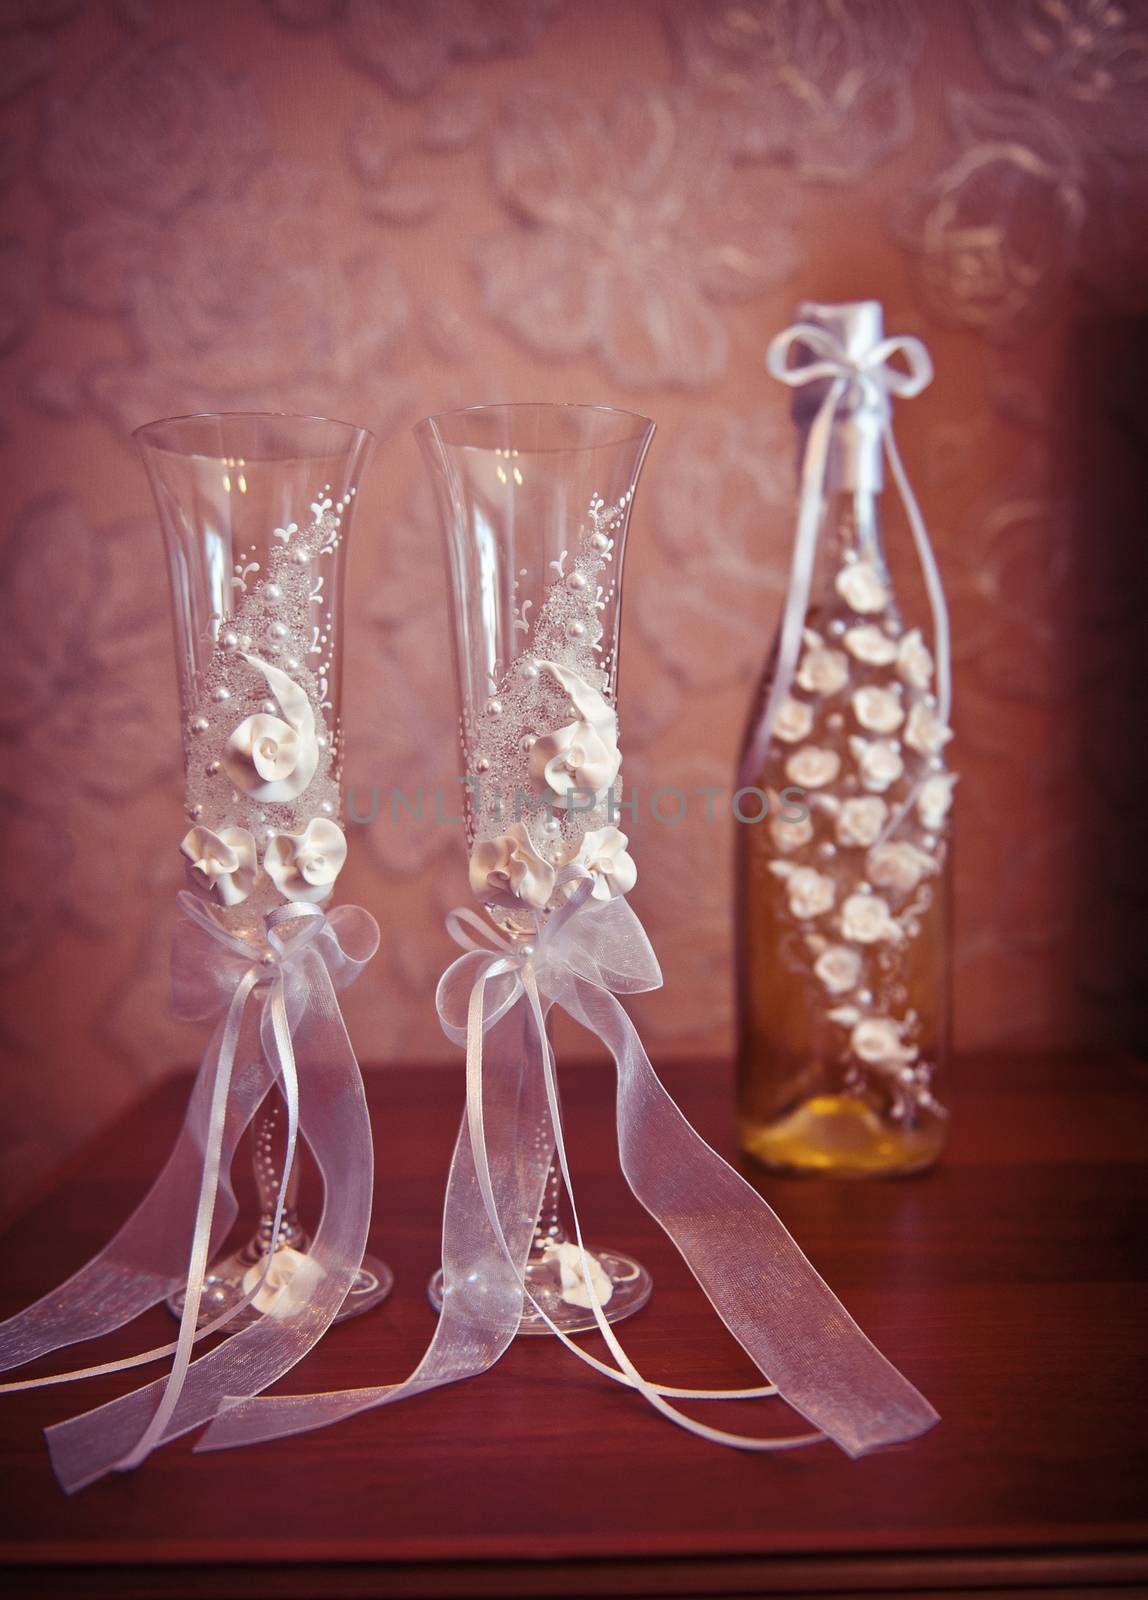 Two wedding glasses and a bottle of champagne on the table.